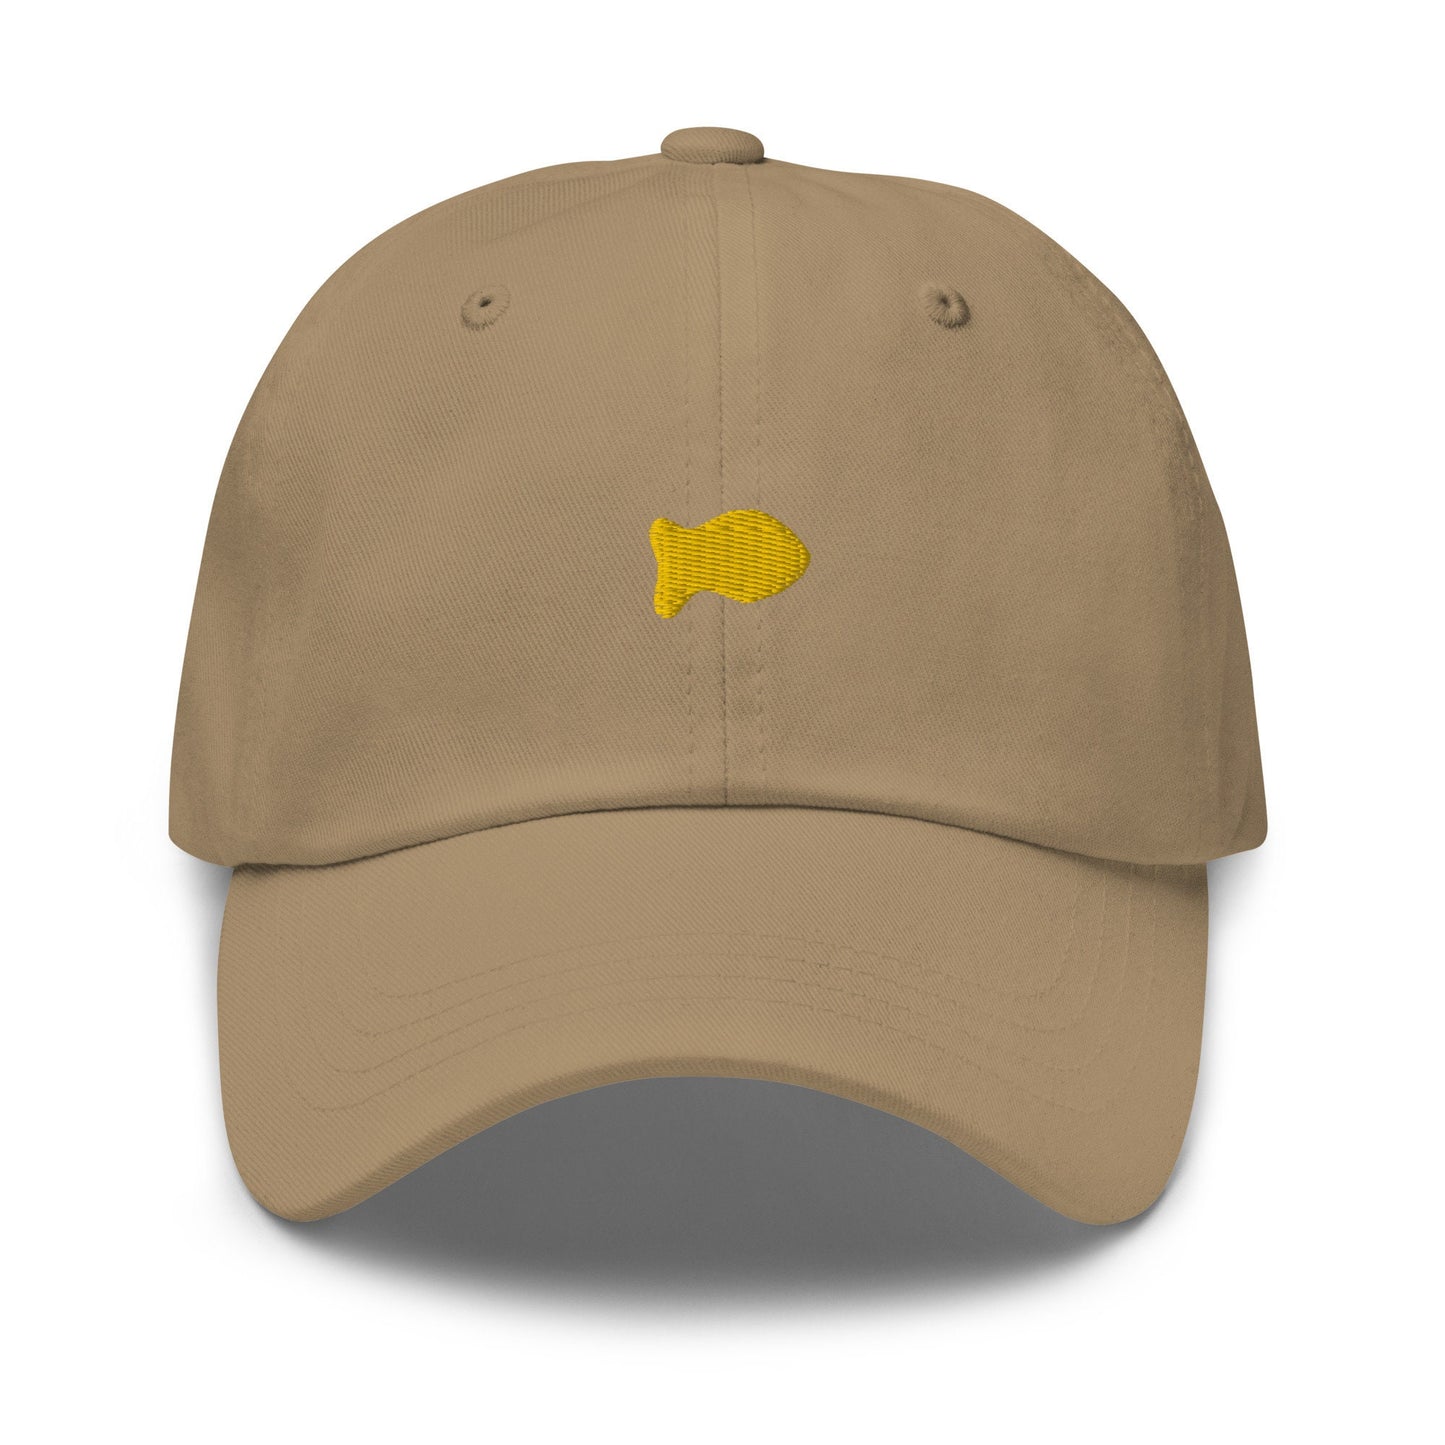 Goldfish Dad Hat - Gift for Cheesy Snack Fans - Minimalist Cotton Embroidered Cap